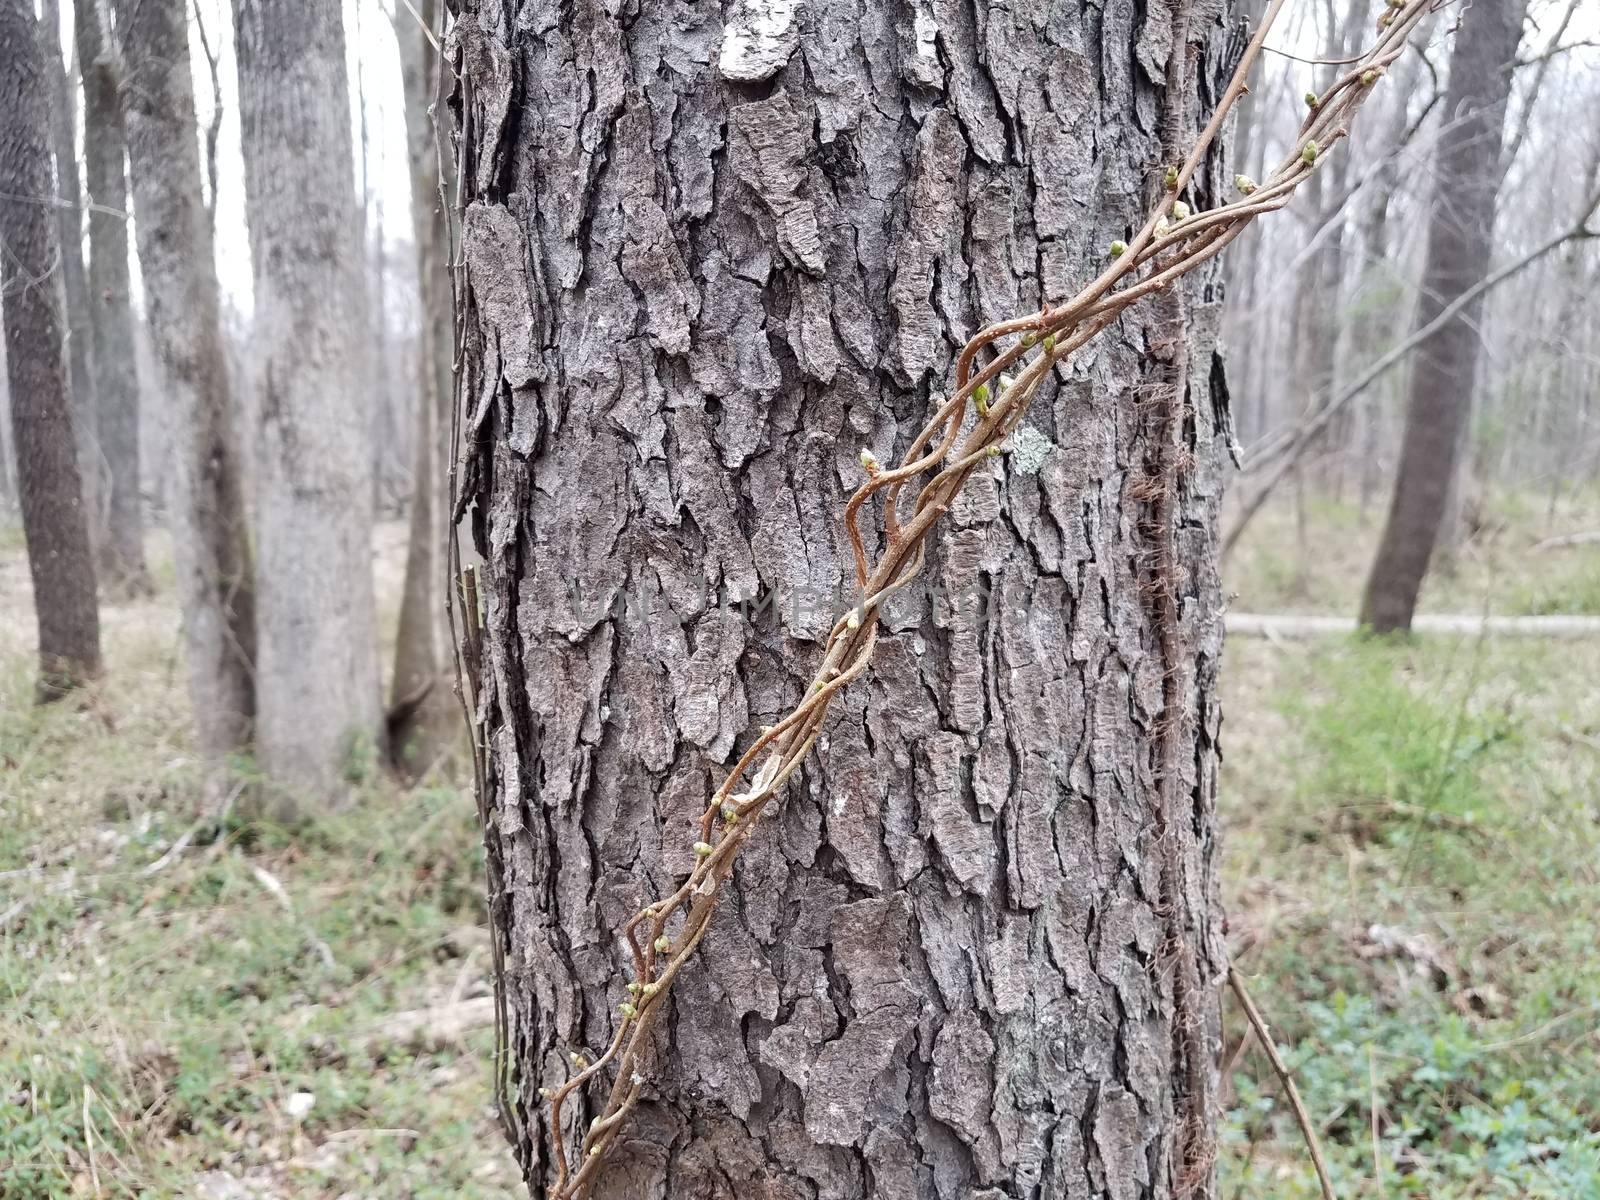 tree in forest or woods with rough brown bark and vines